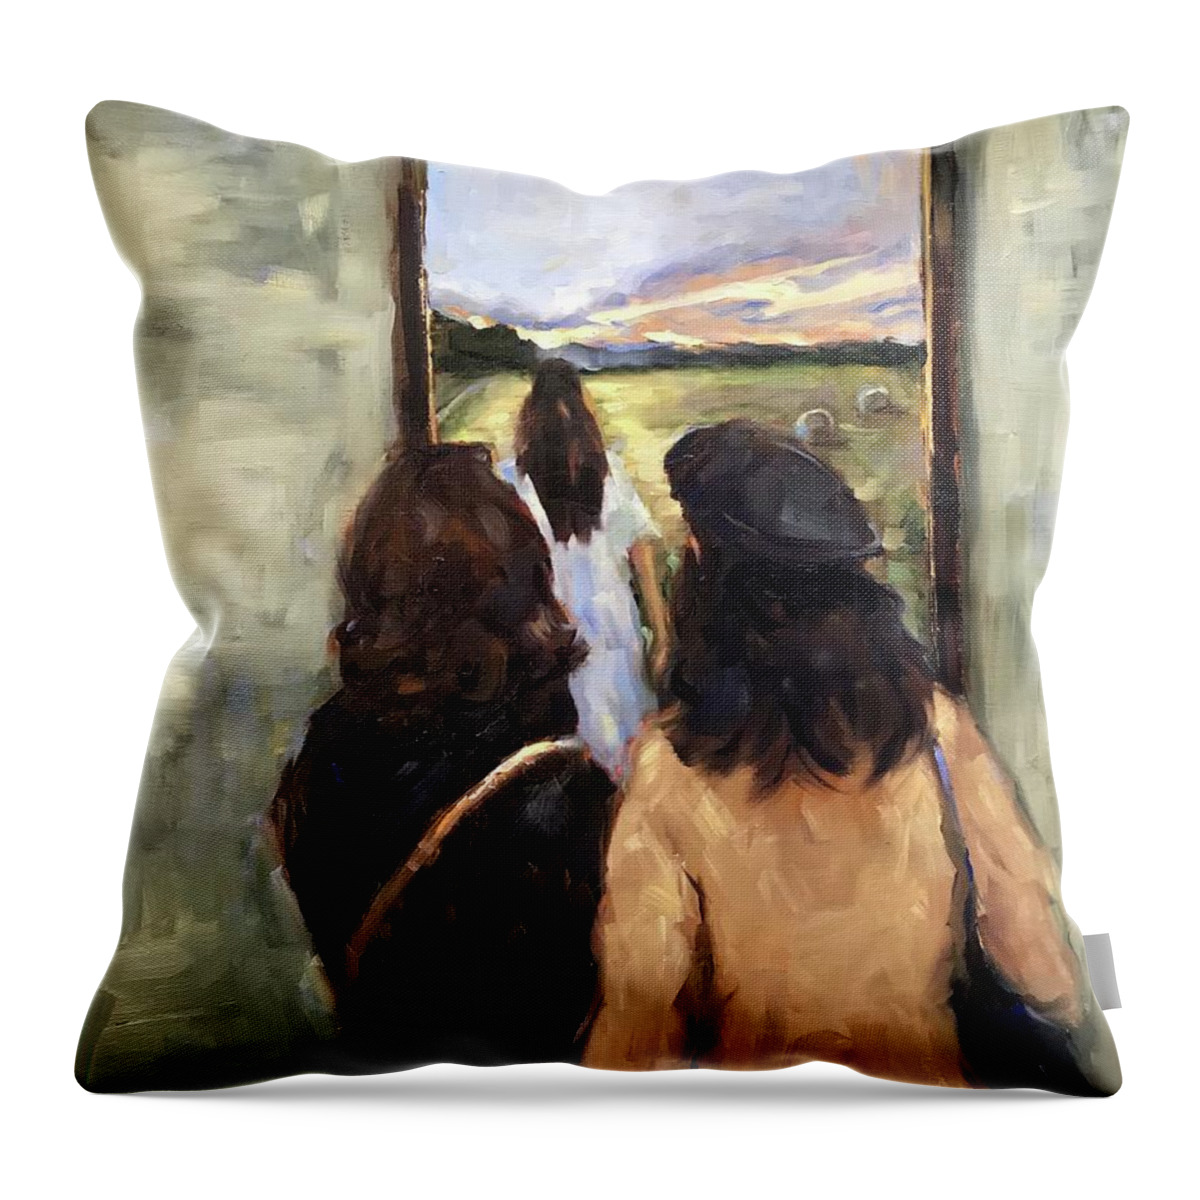 Museum Throw Pillow featuring the painting Once Upon A Dream by Ashlee Trcka